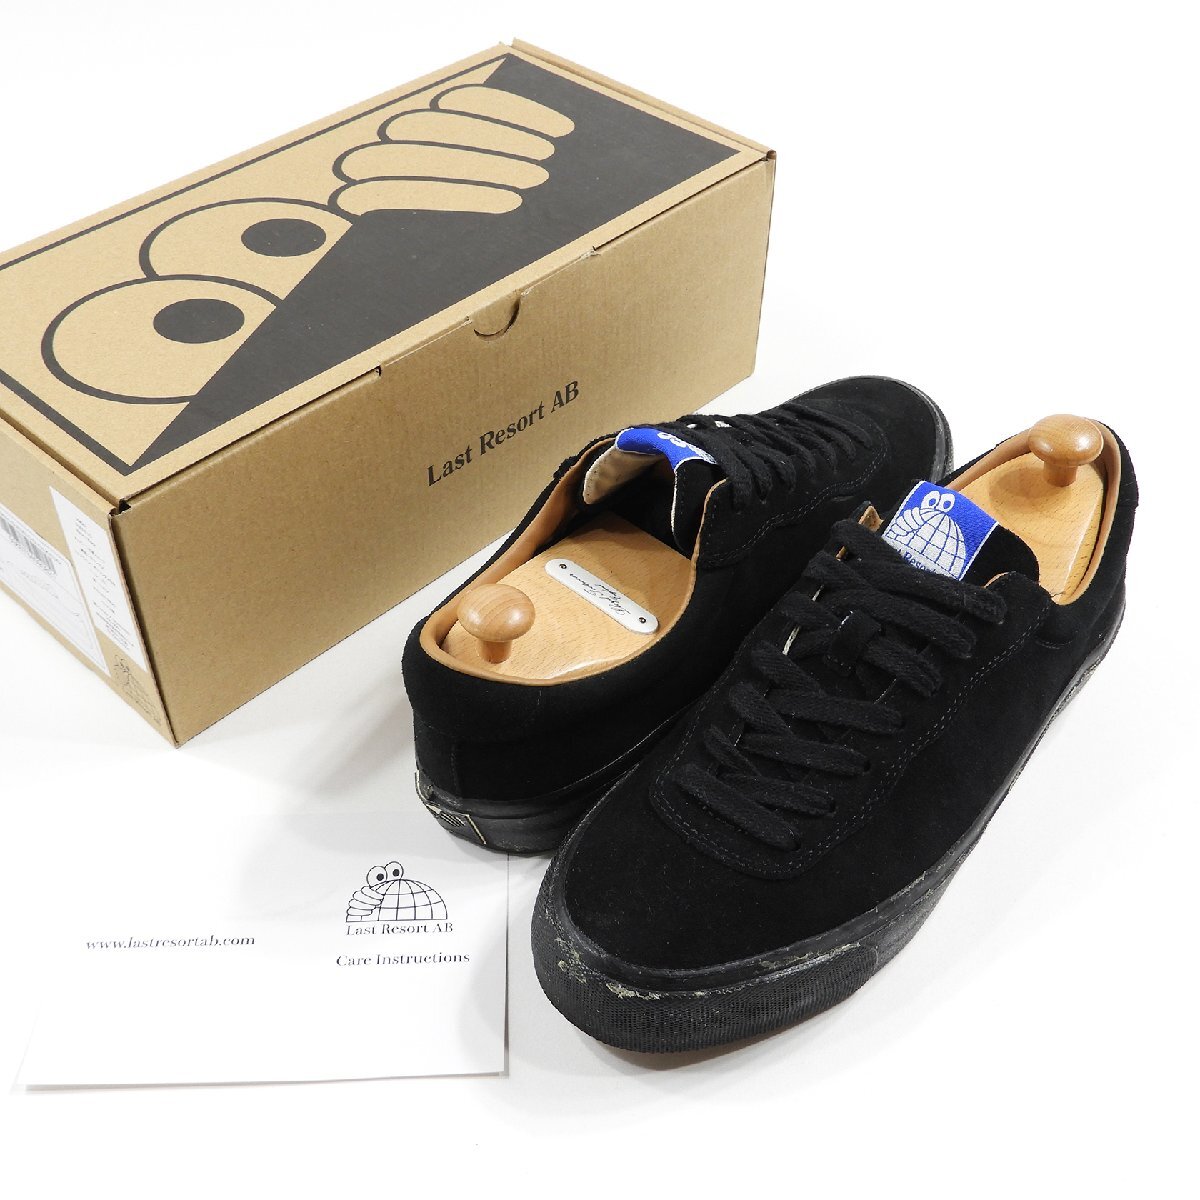  box attaching Last Resort AB suede sneakers VM001 low cut size 9 #18802 last resort e- Be suede shoes 